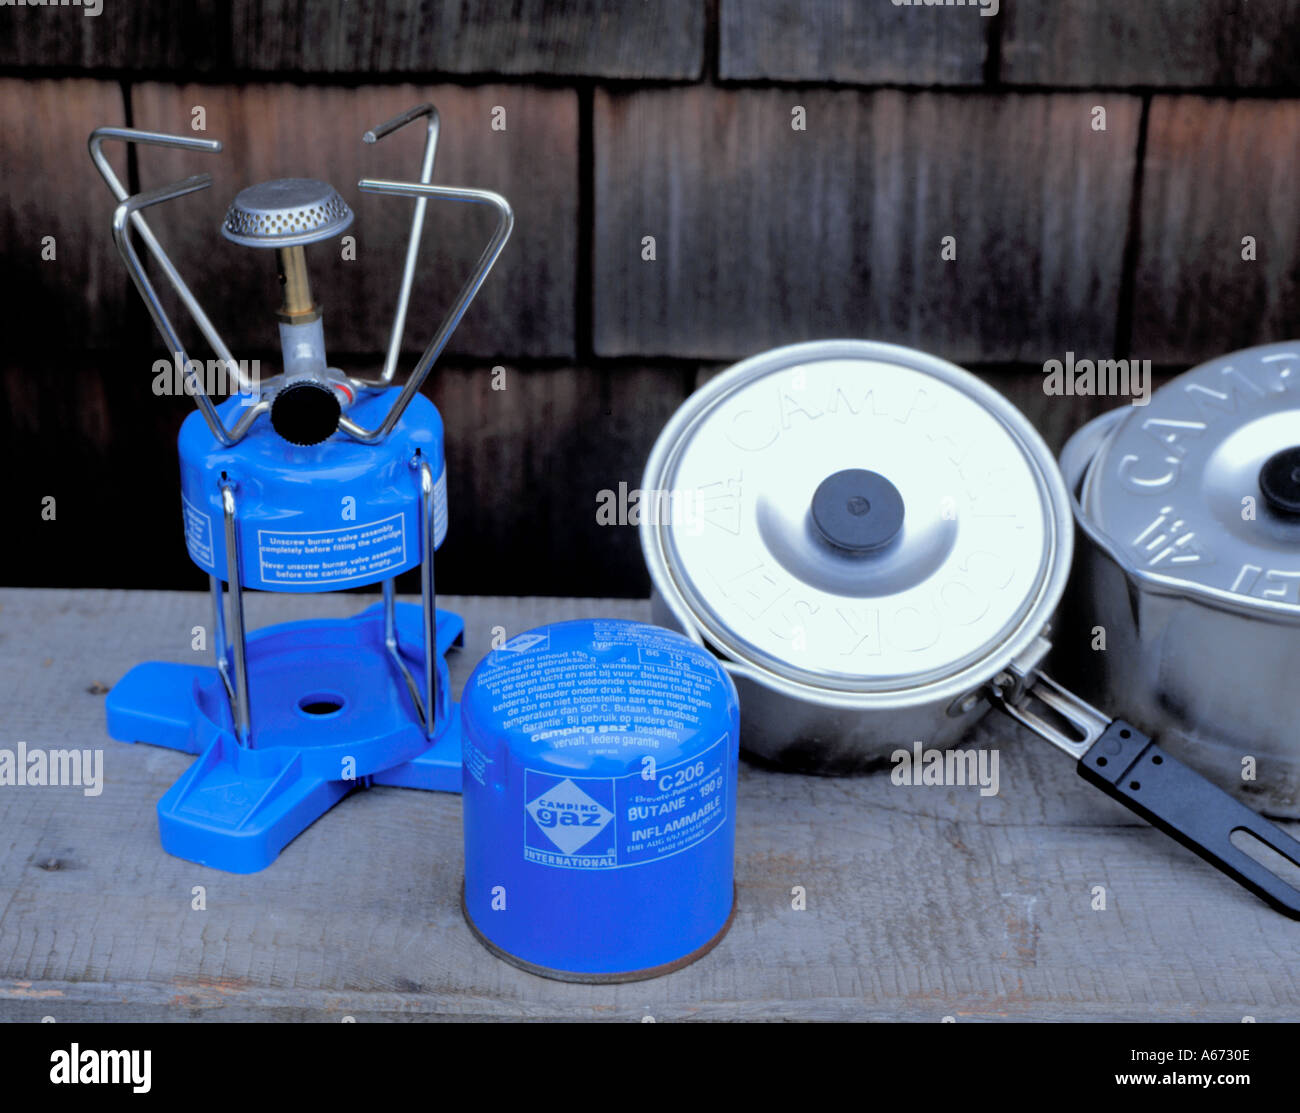 camping gaz heater with reflector Stock Photo - Alamy